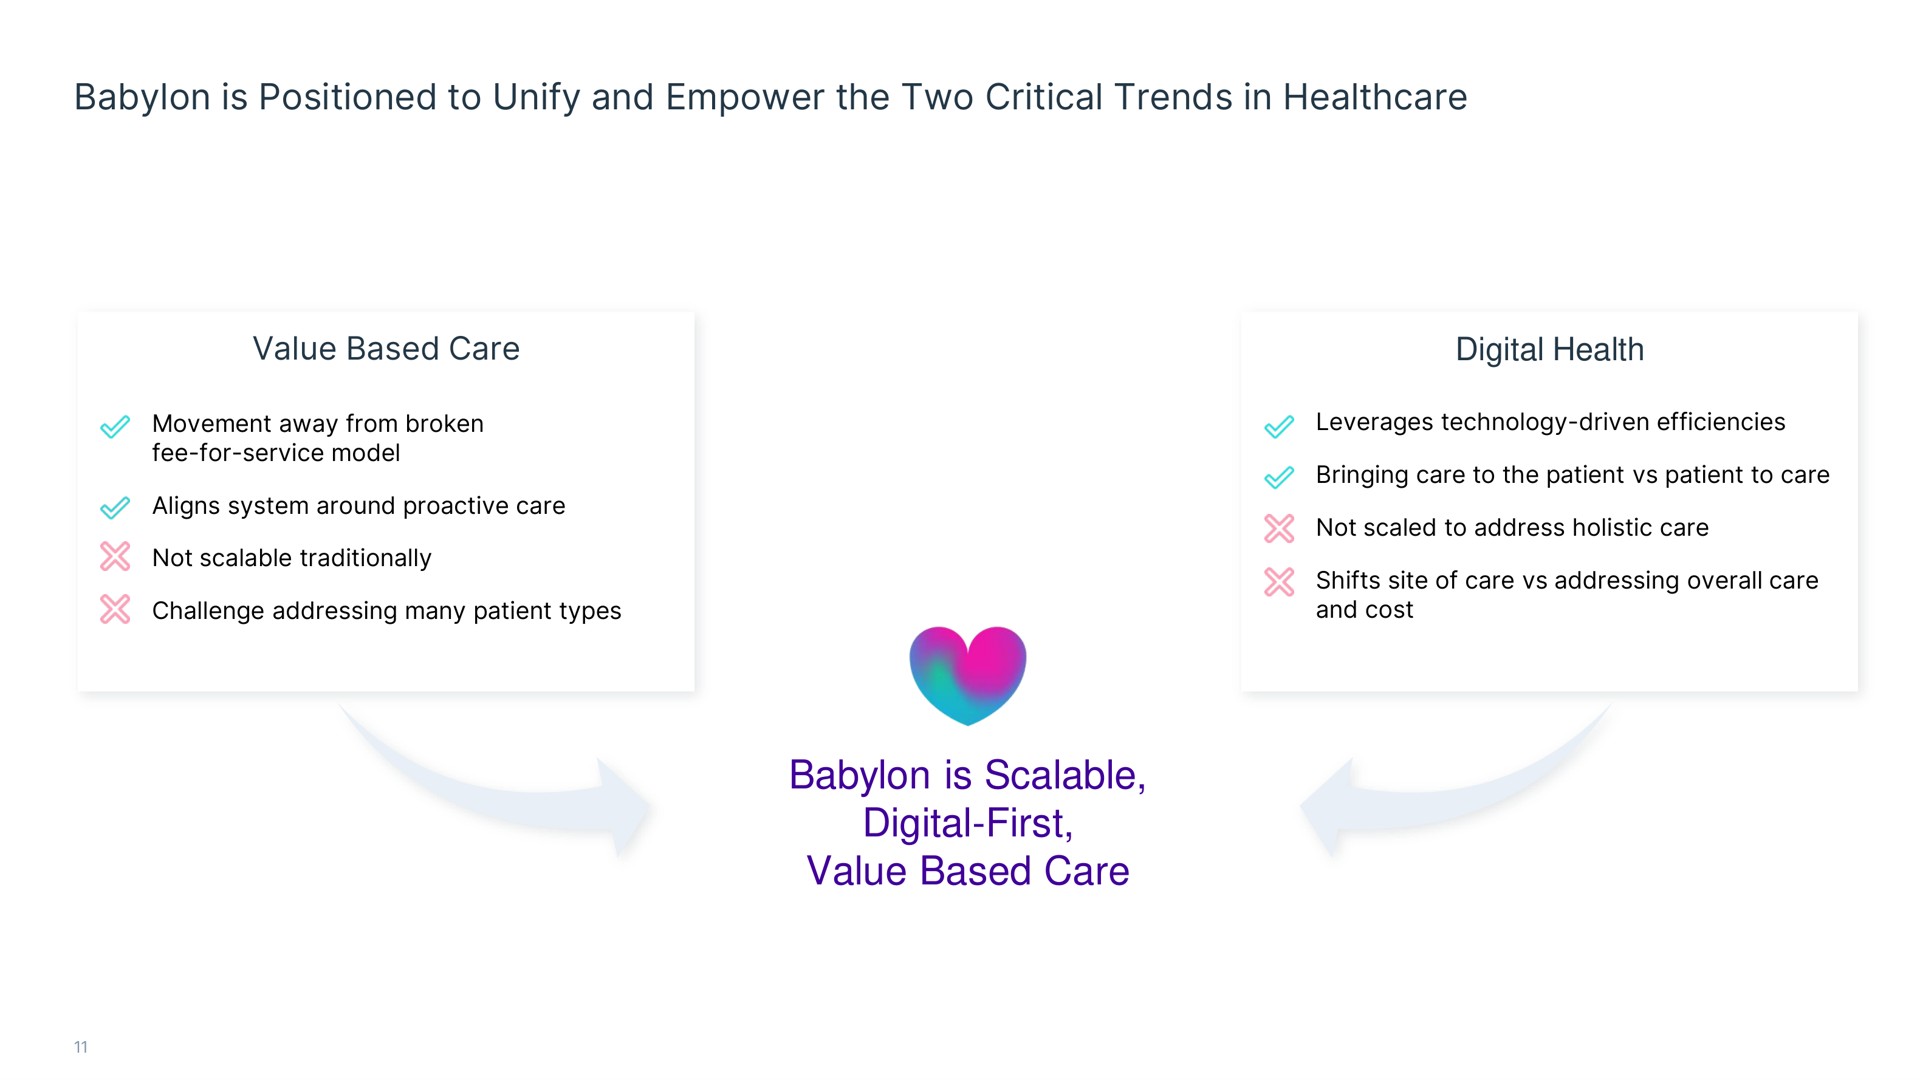 is positioned to unify and empower the two critical trends in is scalable digital first value based care | Babylon